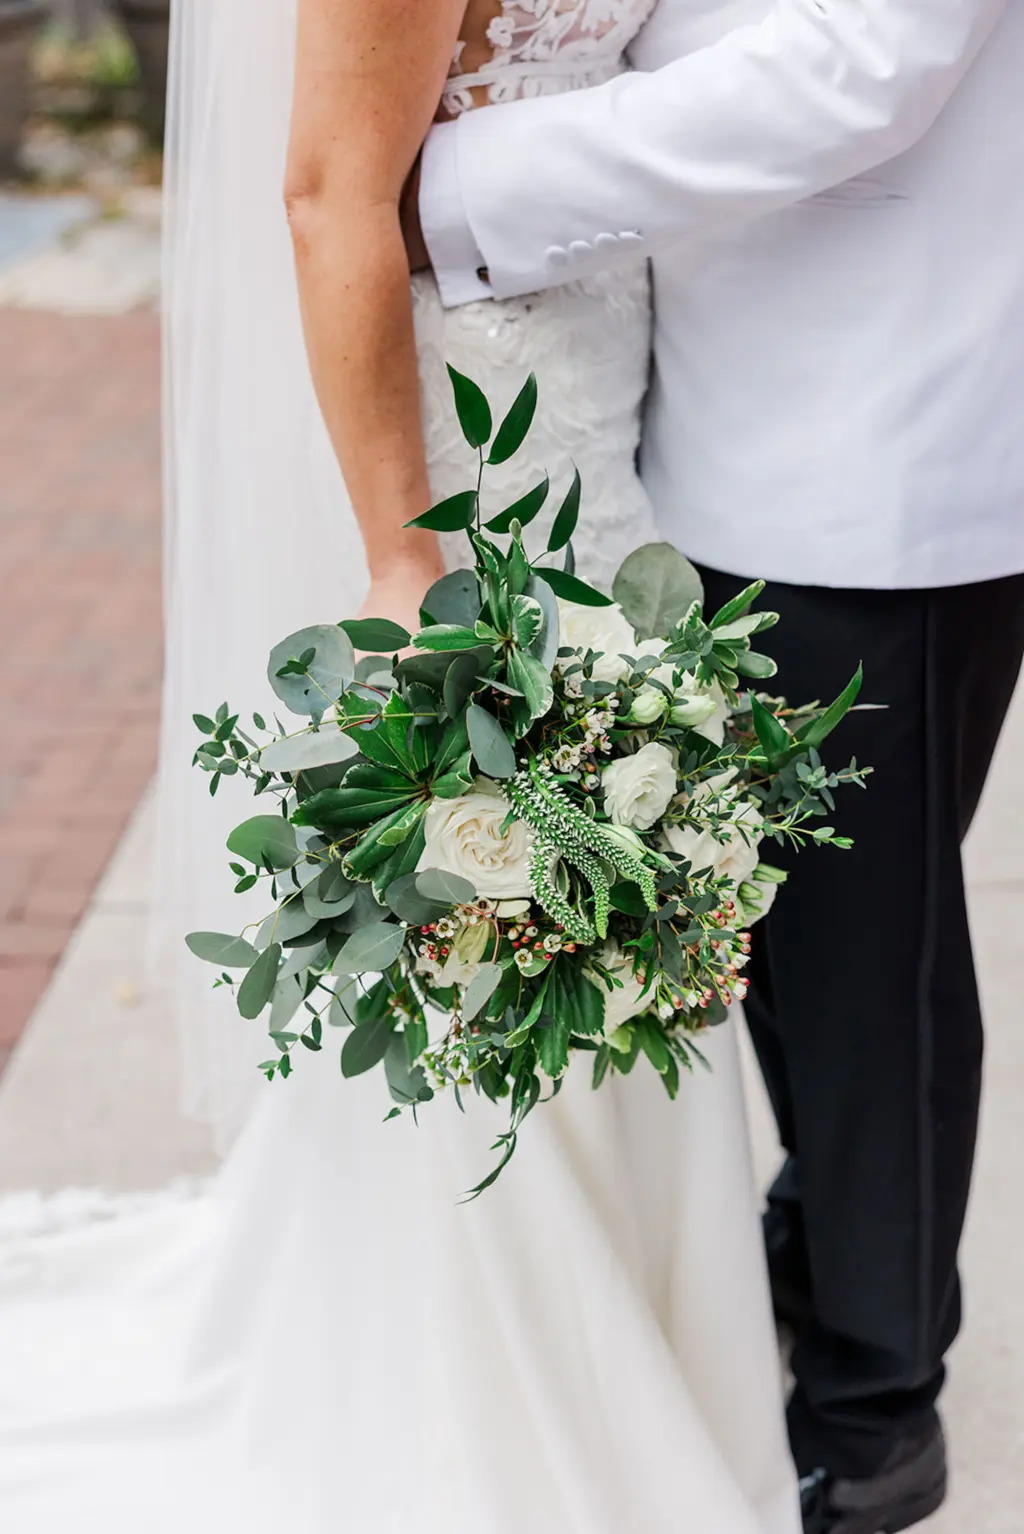 White Roses, Veronica, and Greenery Bridal Wedding Bouquet Ideas